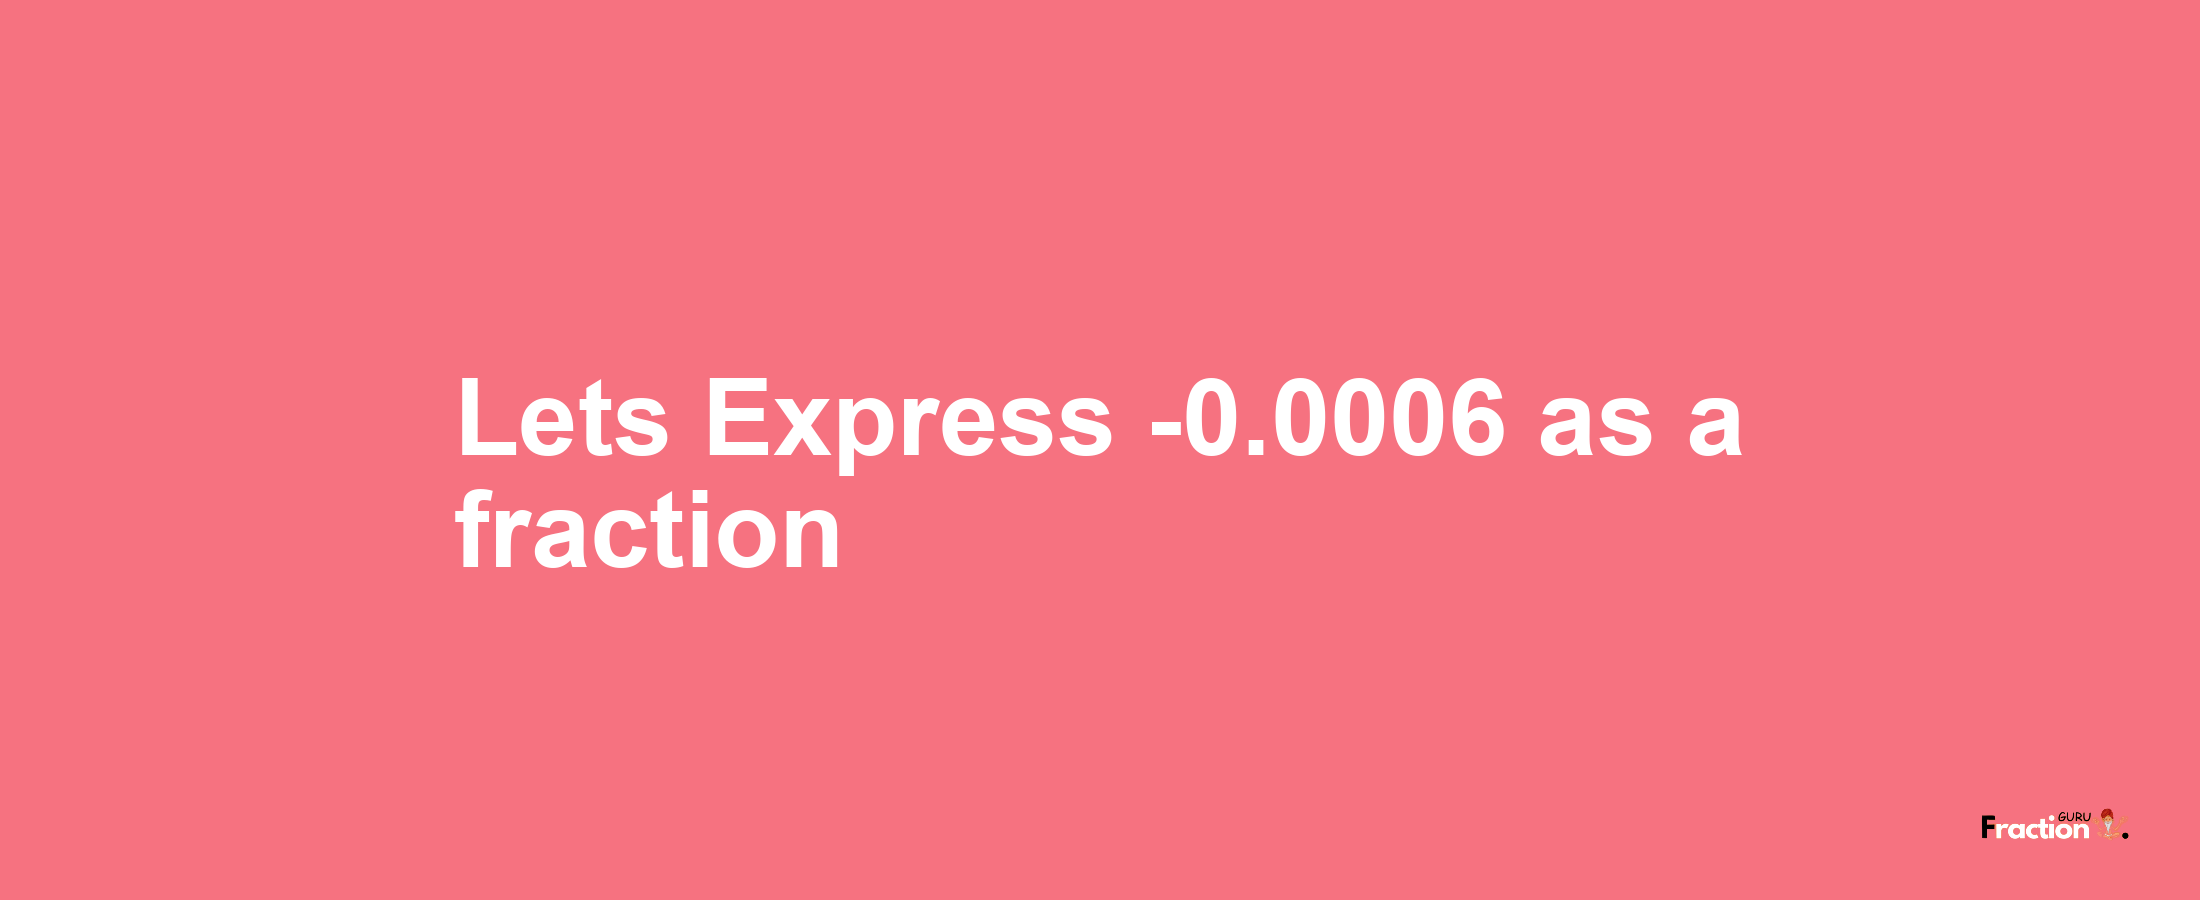 Lets Express -0.0006 as afraction